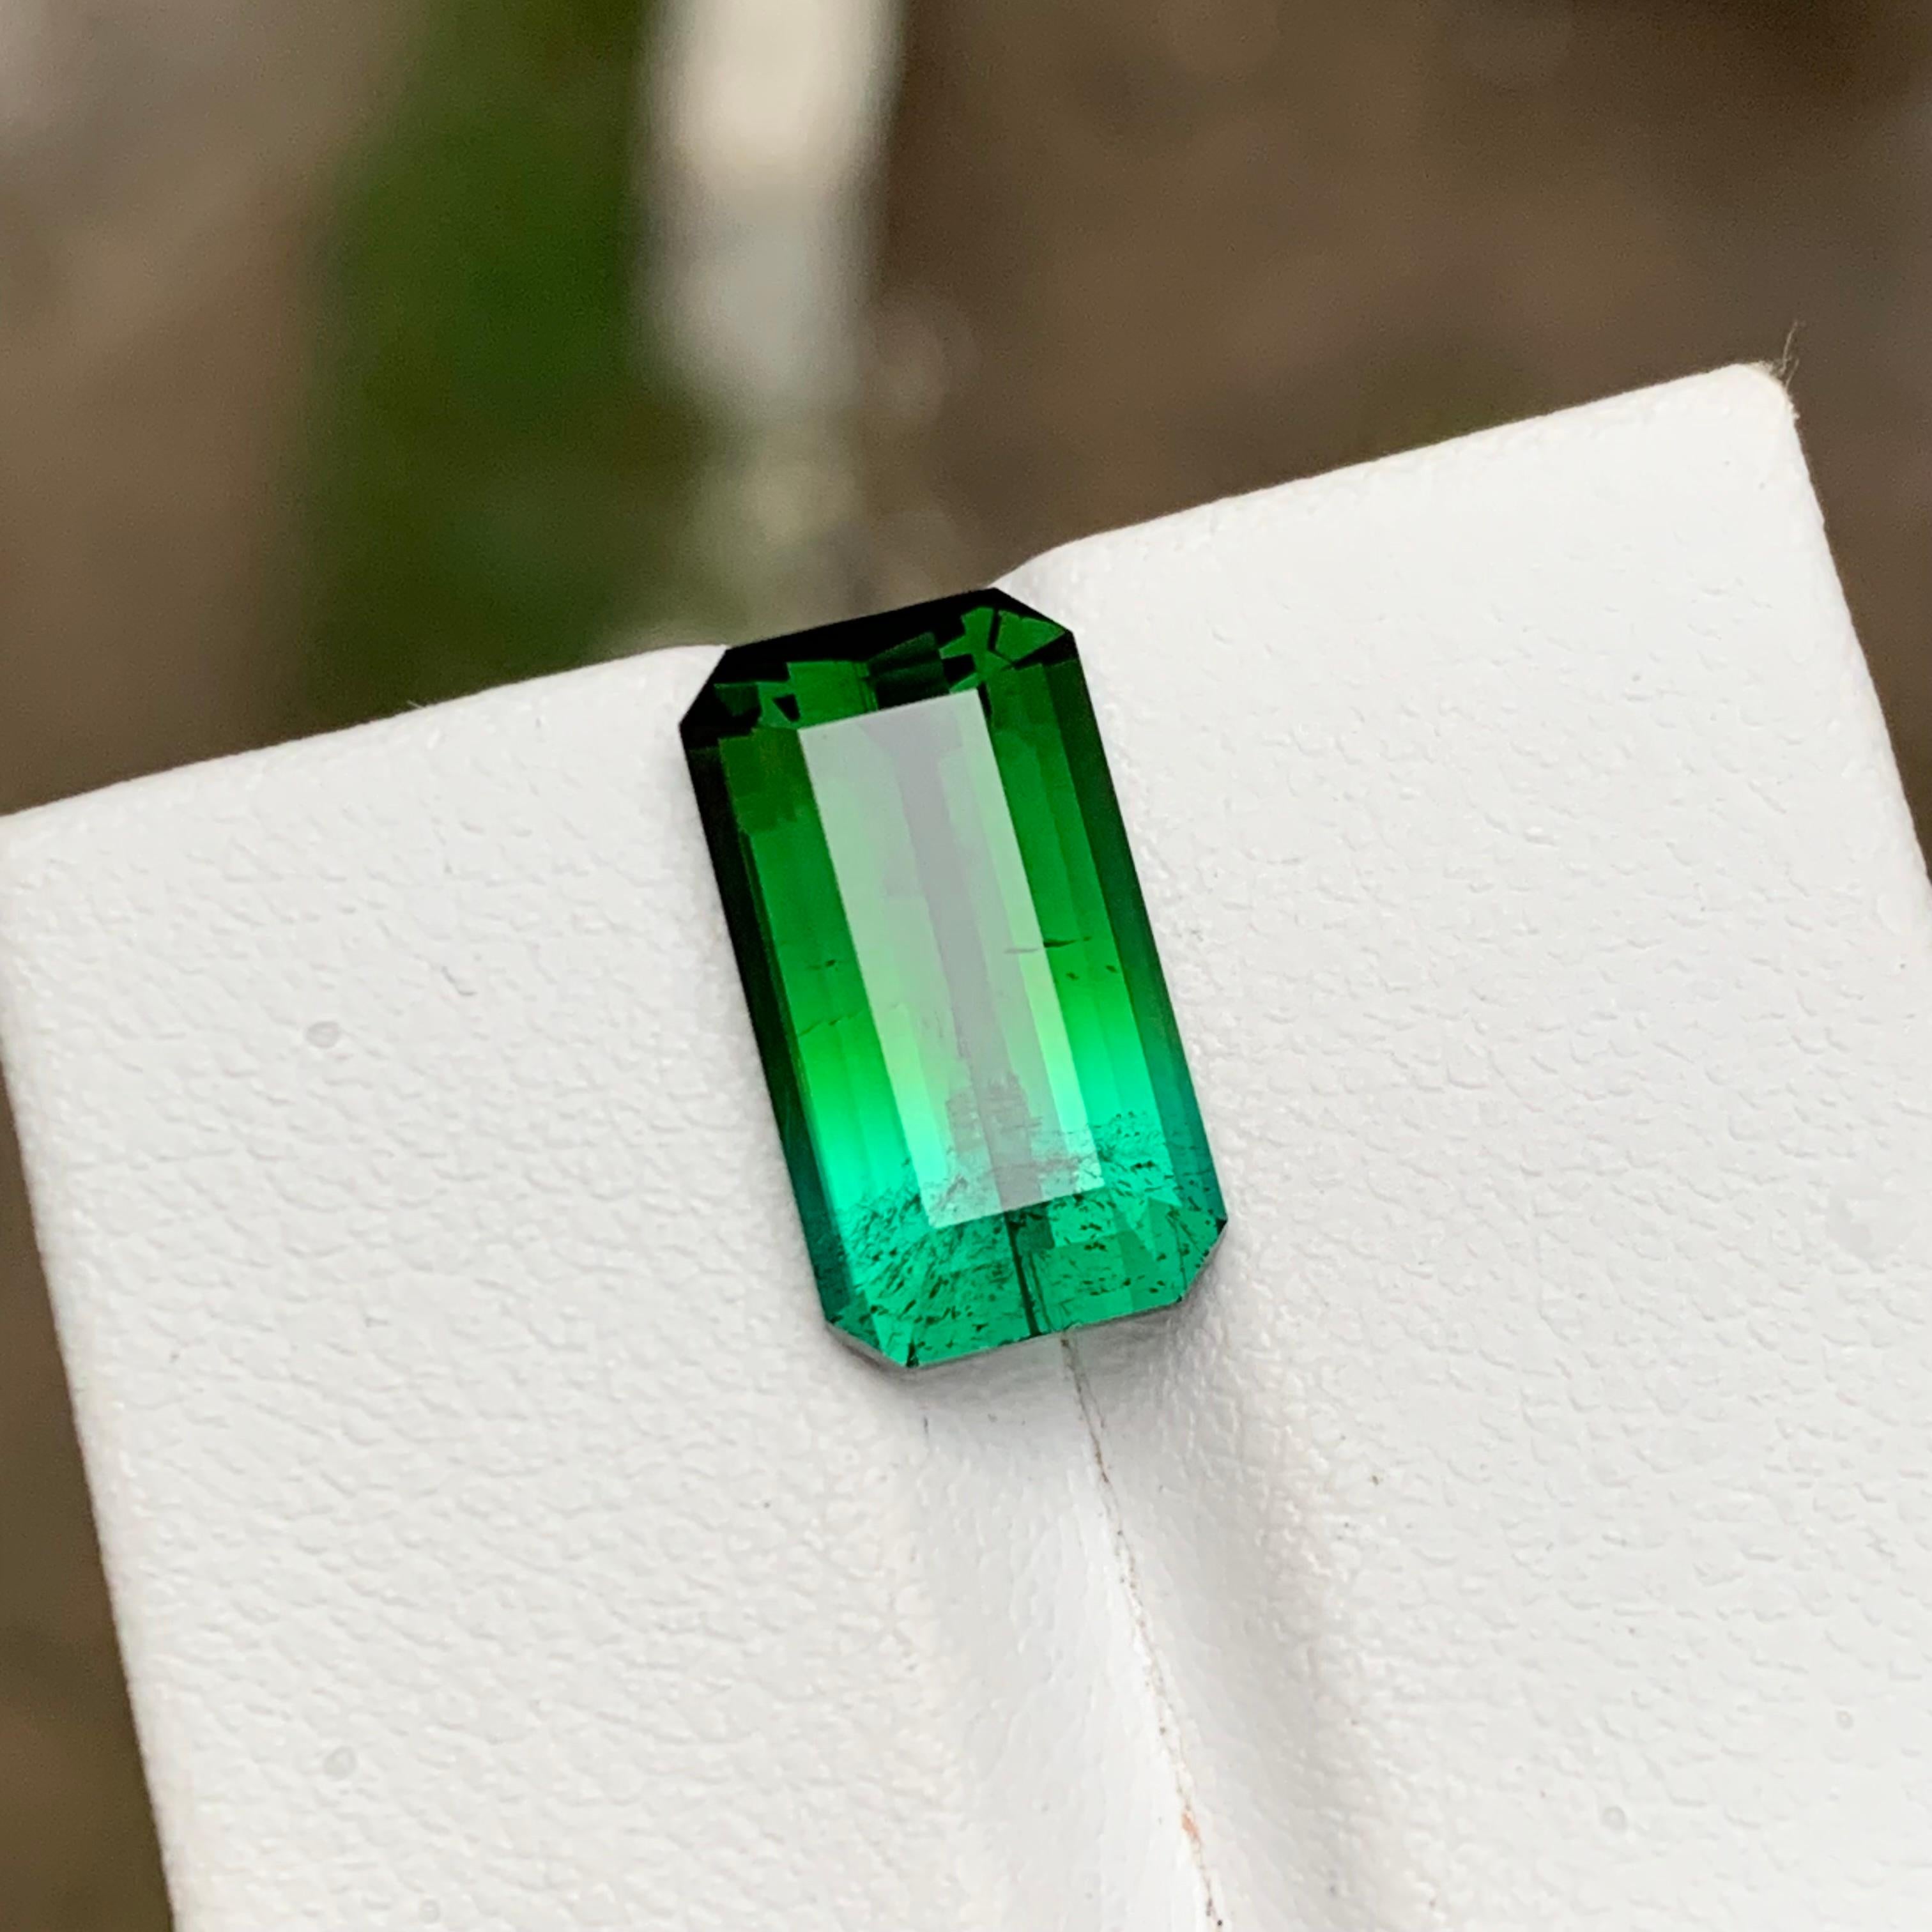 Rare Green & Neon Blue Bicolor Tourmaline Gemstone, 5.05 Ct Emerald Cut for Ring For Sale 2